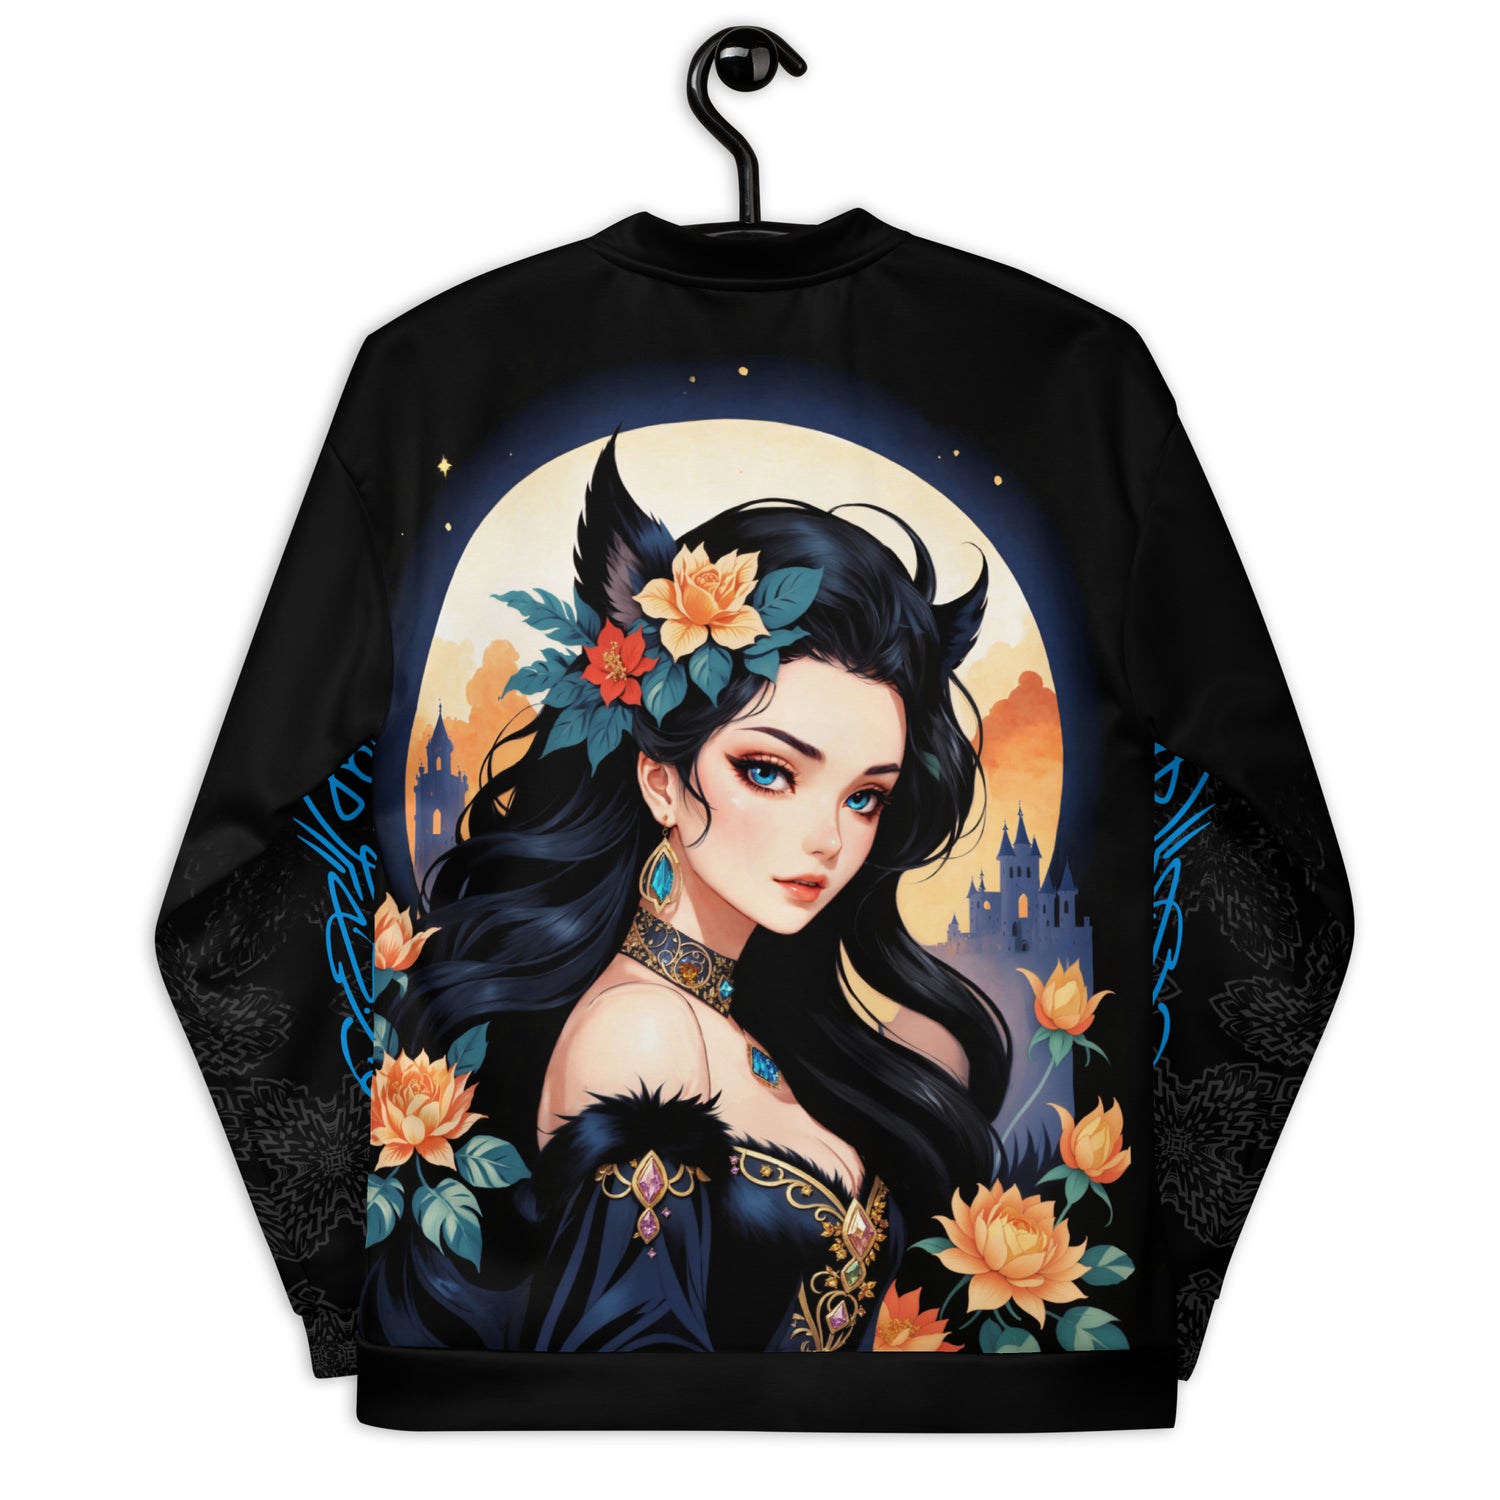 Women's midnight blossom fantasy bomber jacket, enchanting figure with floral crown design, stylish fantasy-inspired women's outerwear.